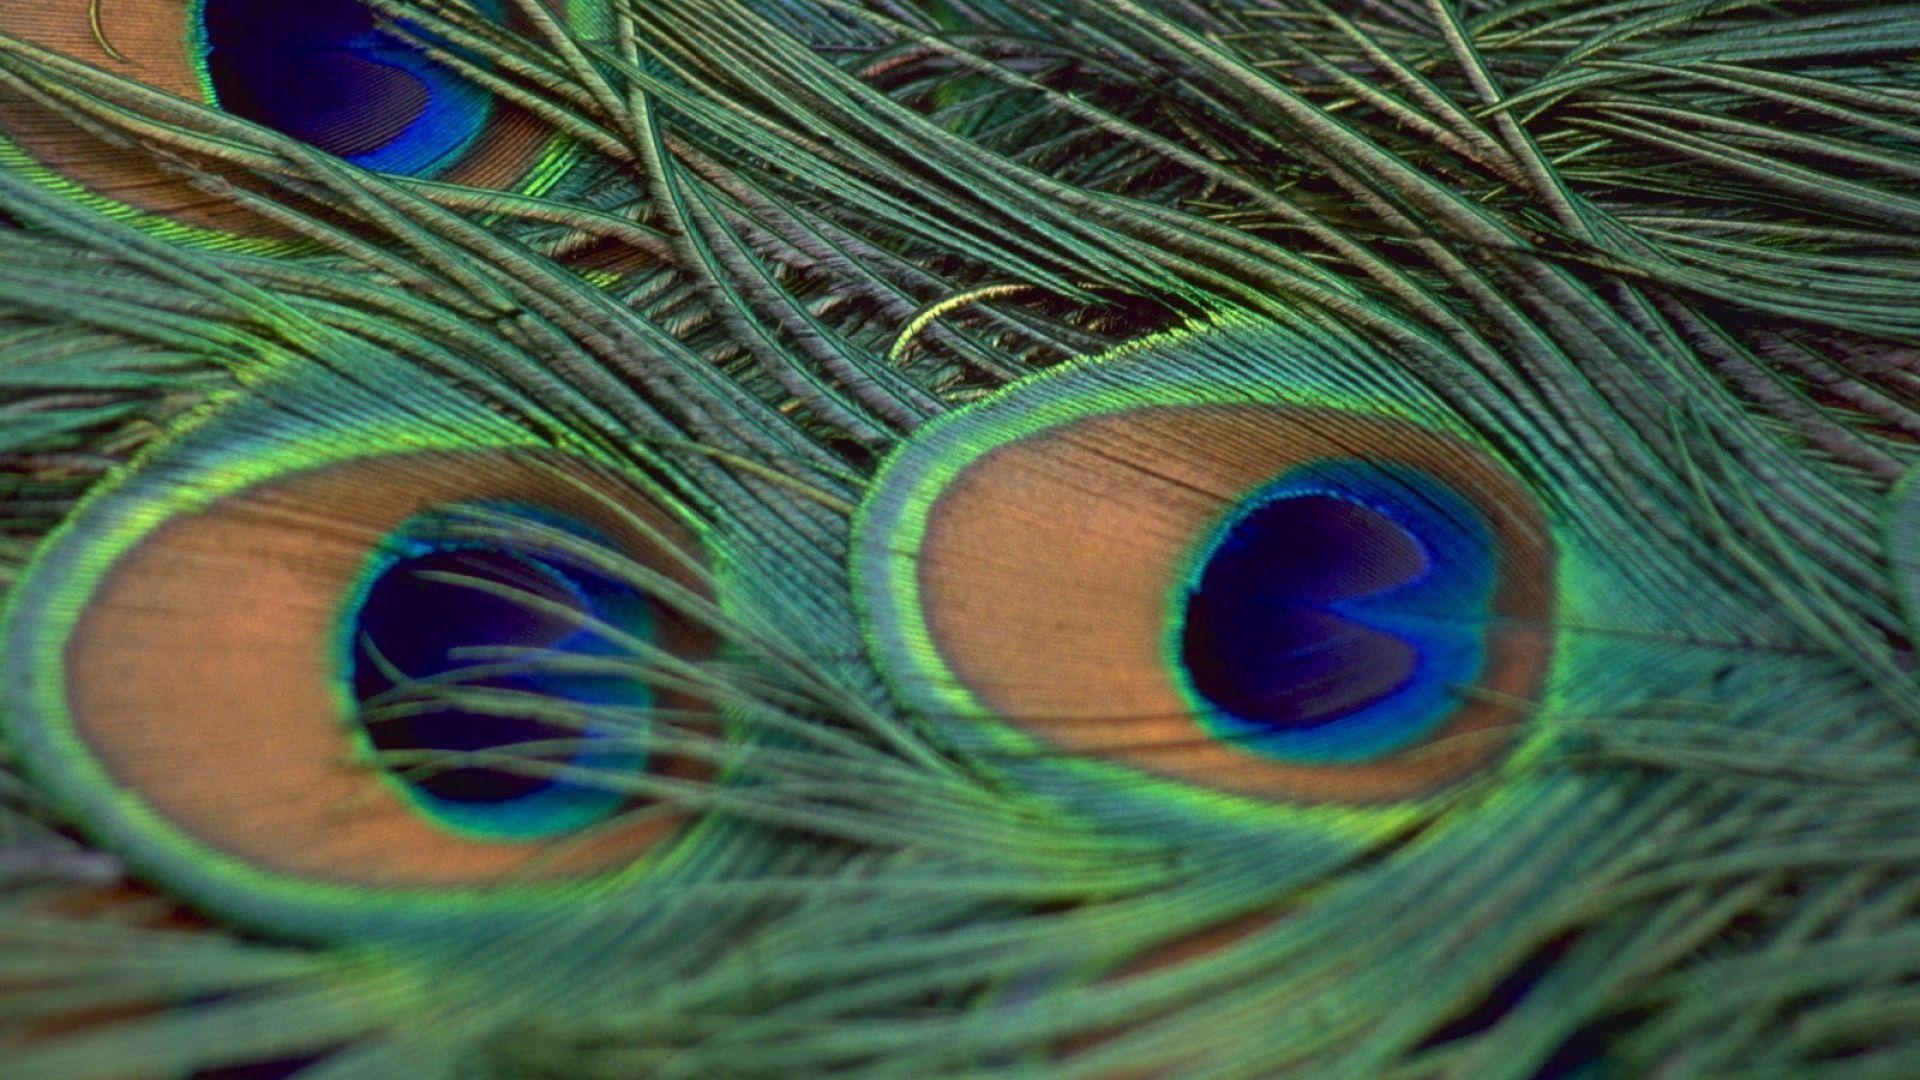 Download Wallpaper 1920x1080 feathers, peacock, colorful, beautiful